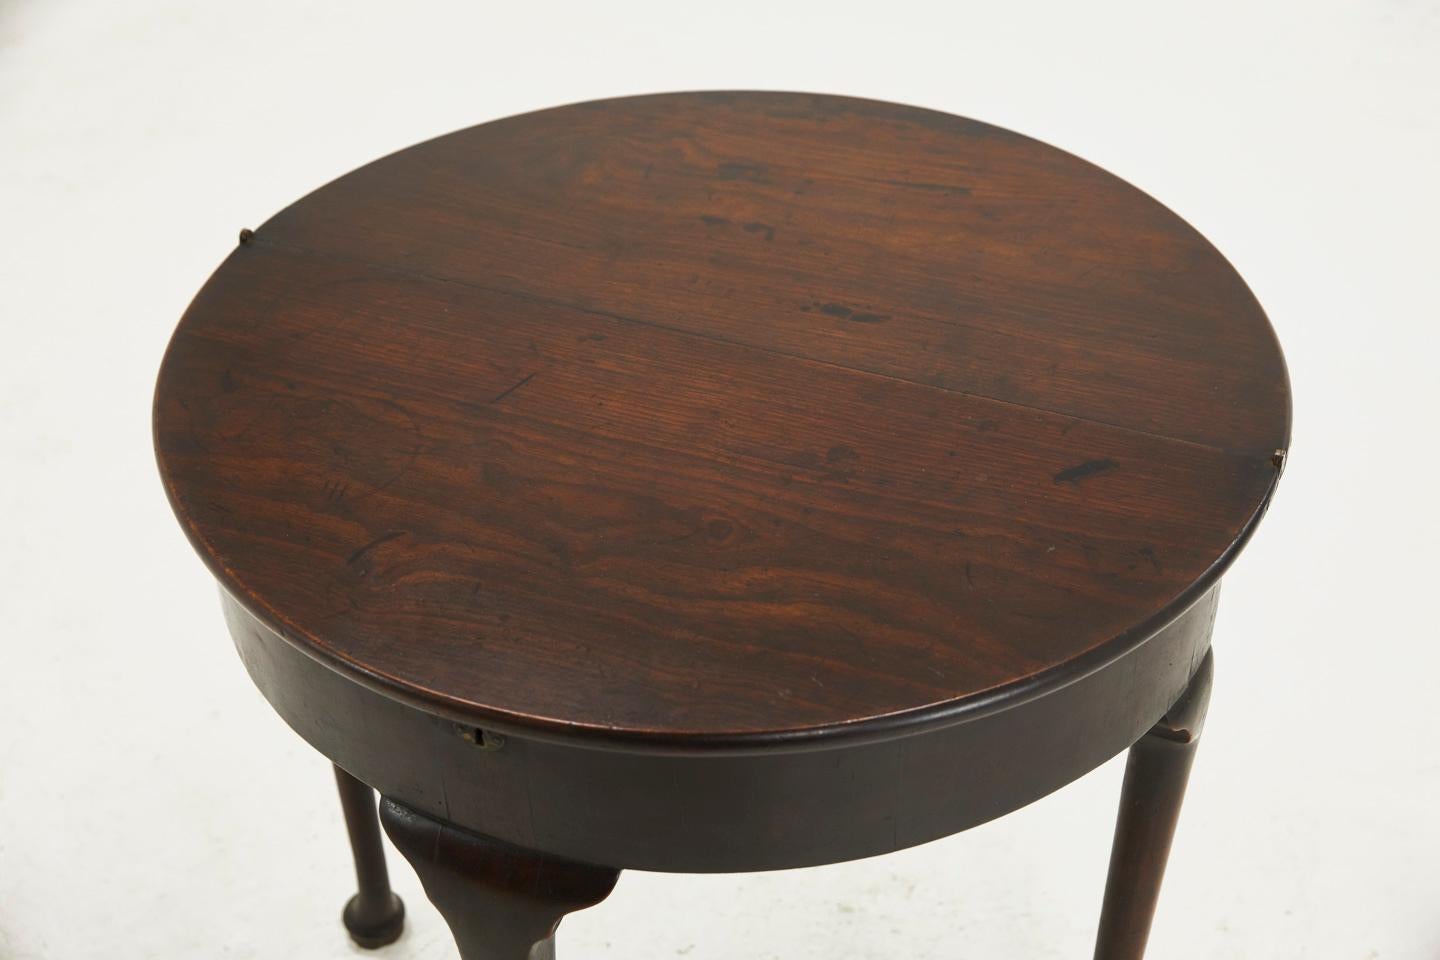 A small proportioned George II mahogany pad-foot half round, fold over top, tea table. Hard to find with such exceptional color and patina, circa 1740.